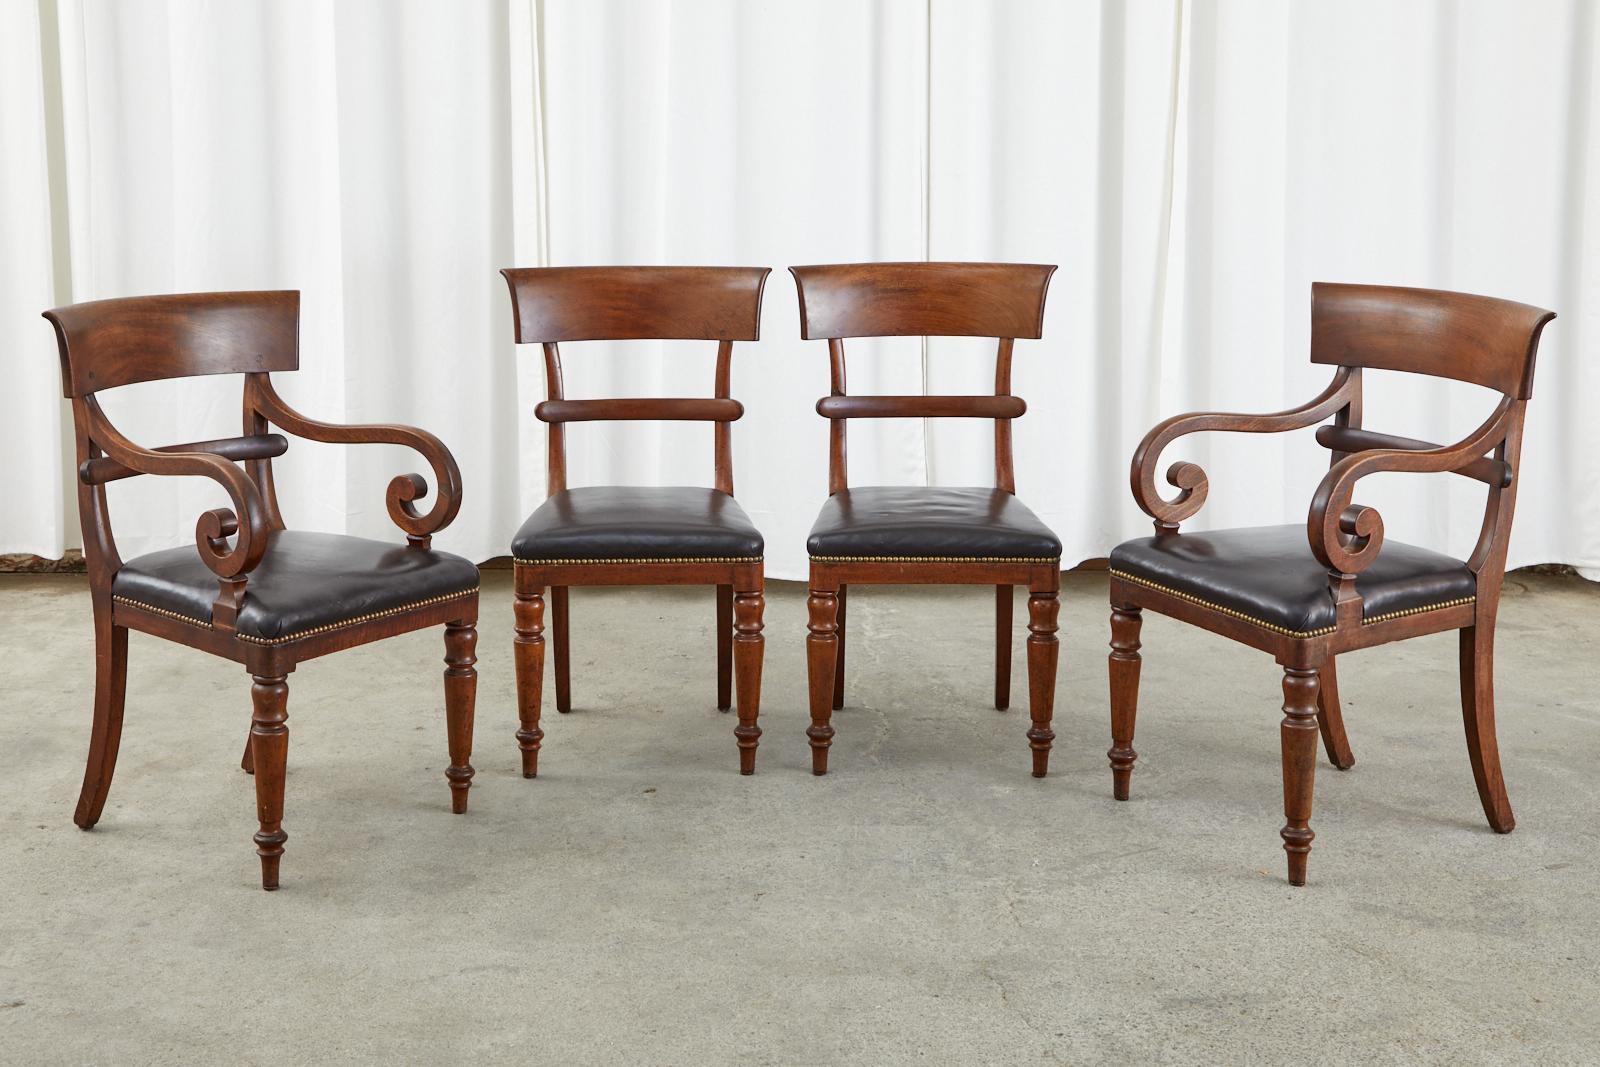 19th century set of English Regency dining chairs or library chairs crafted from mahogany. The set consists of two side chairs and two armchairs measuring 23 inches wide and 23 inches deep. The chairs have a klismos style tablet backrest with